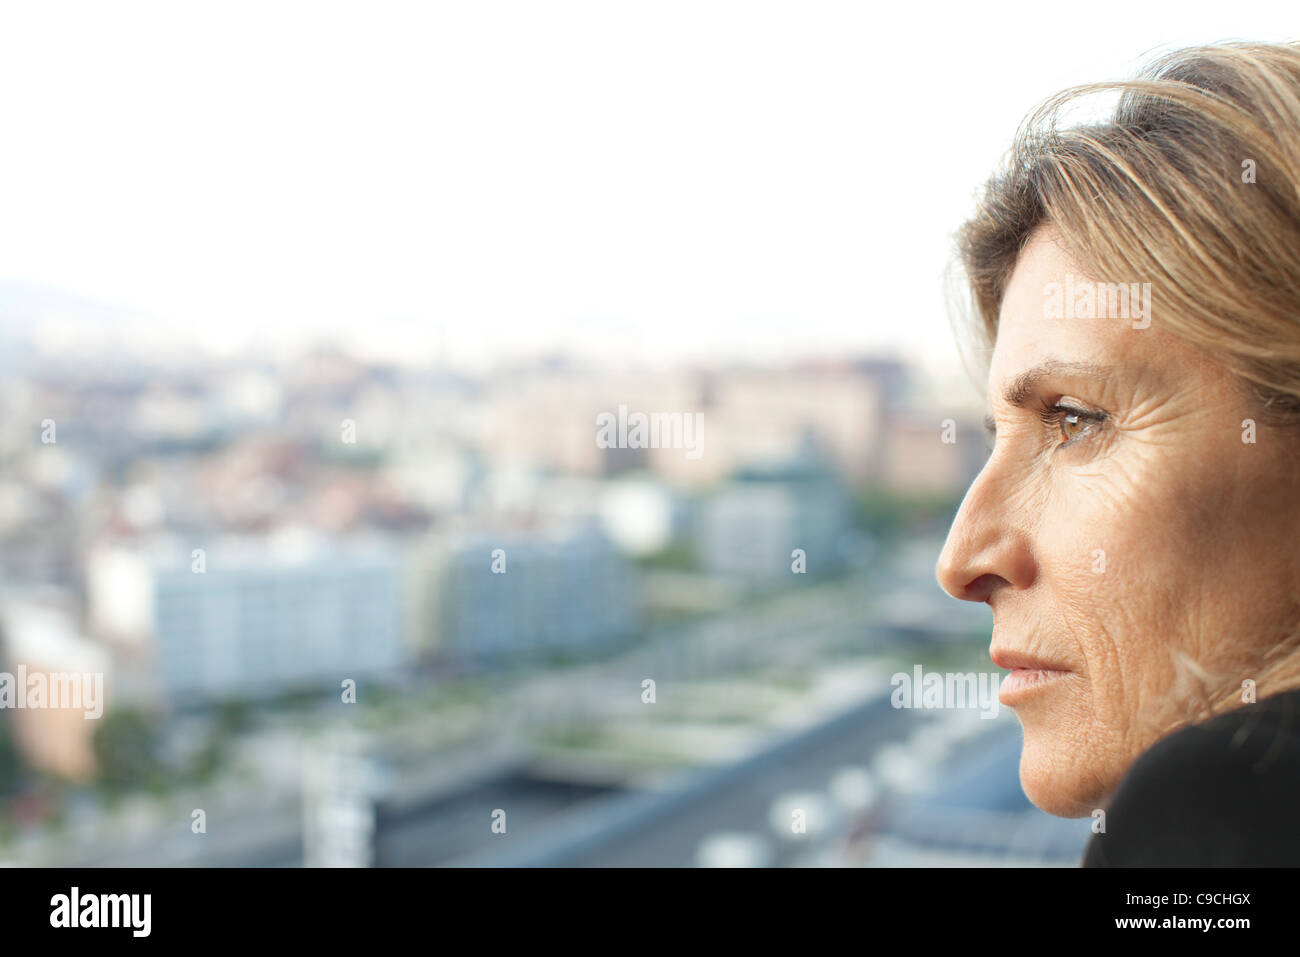 Woman looking at view, side view Stock Photo